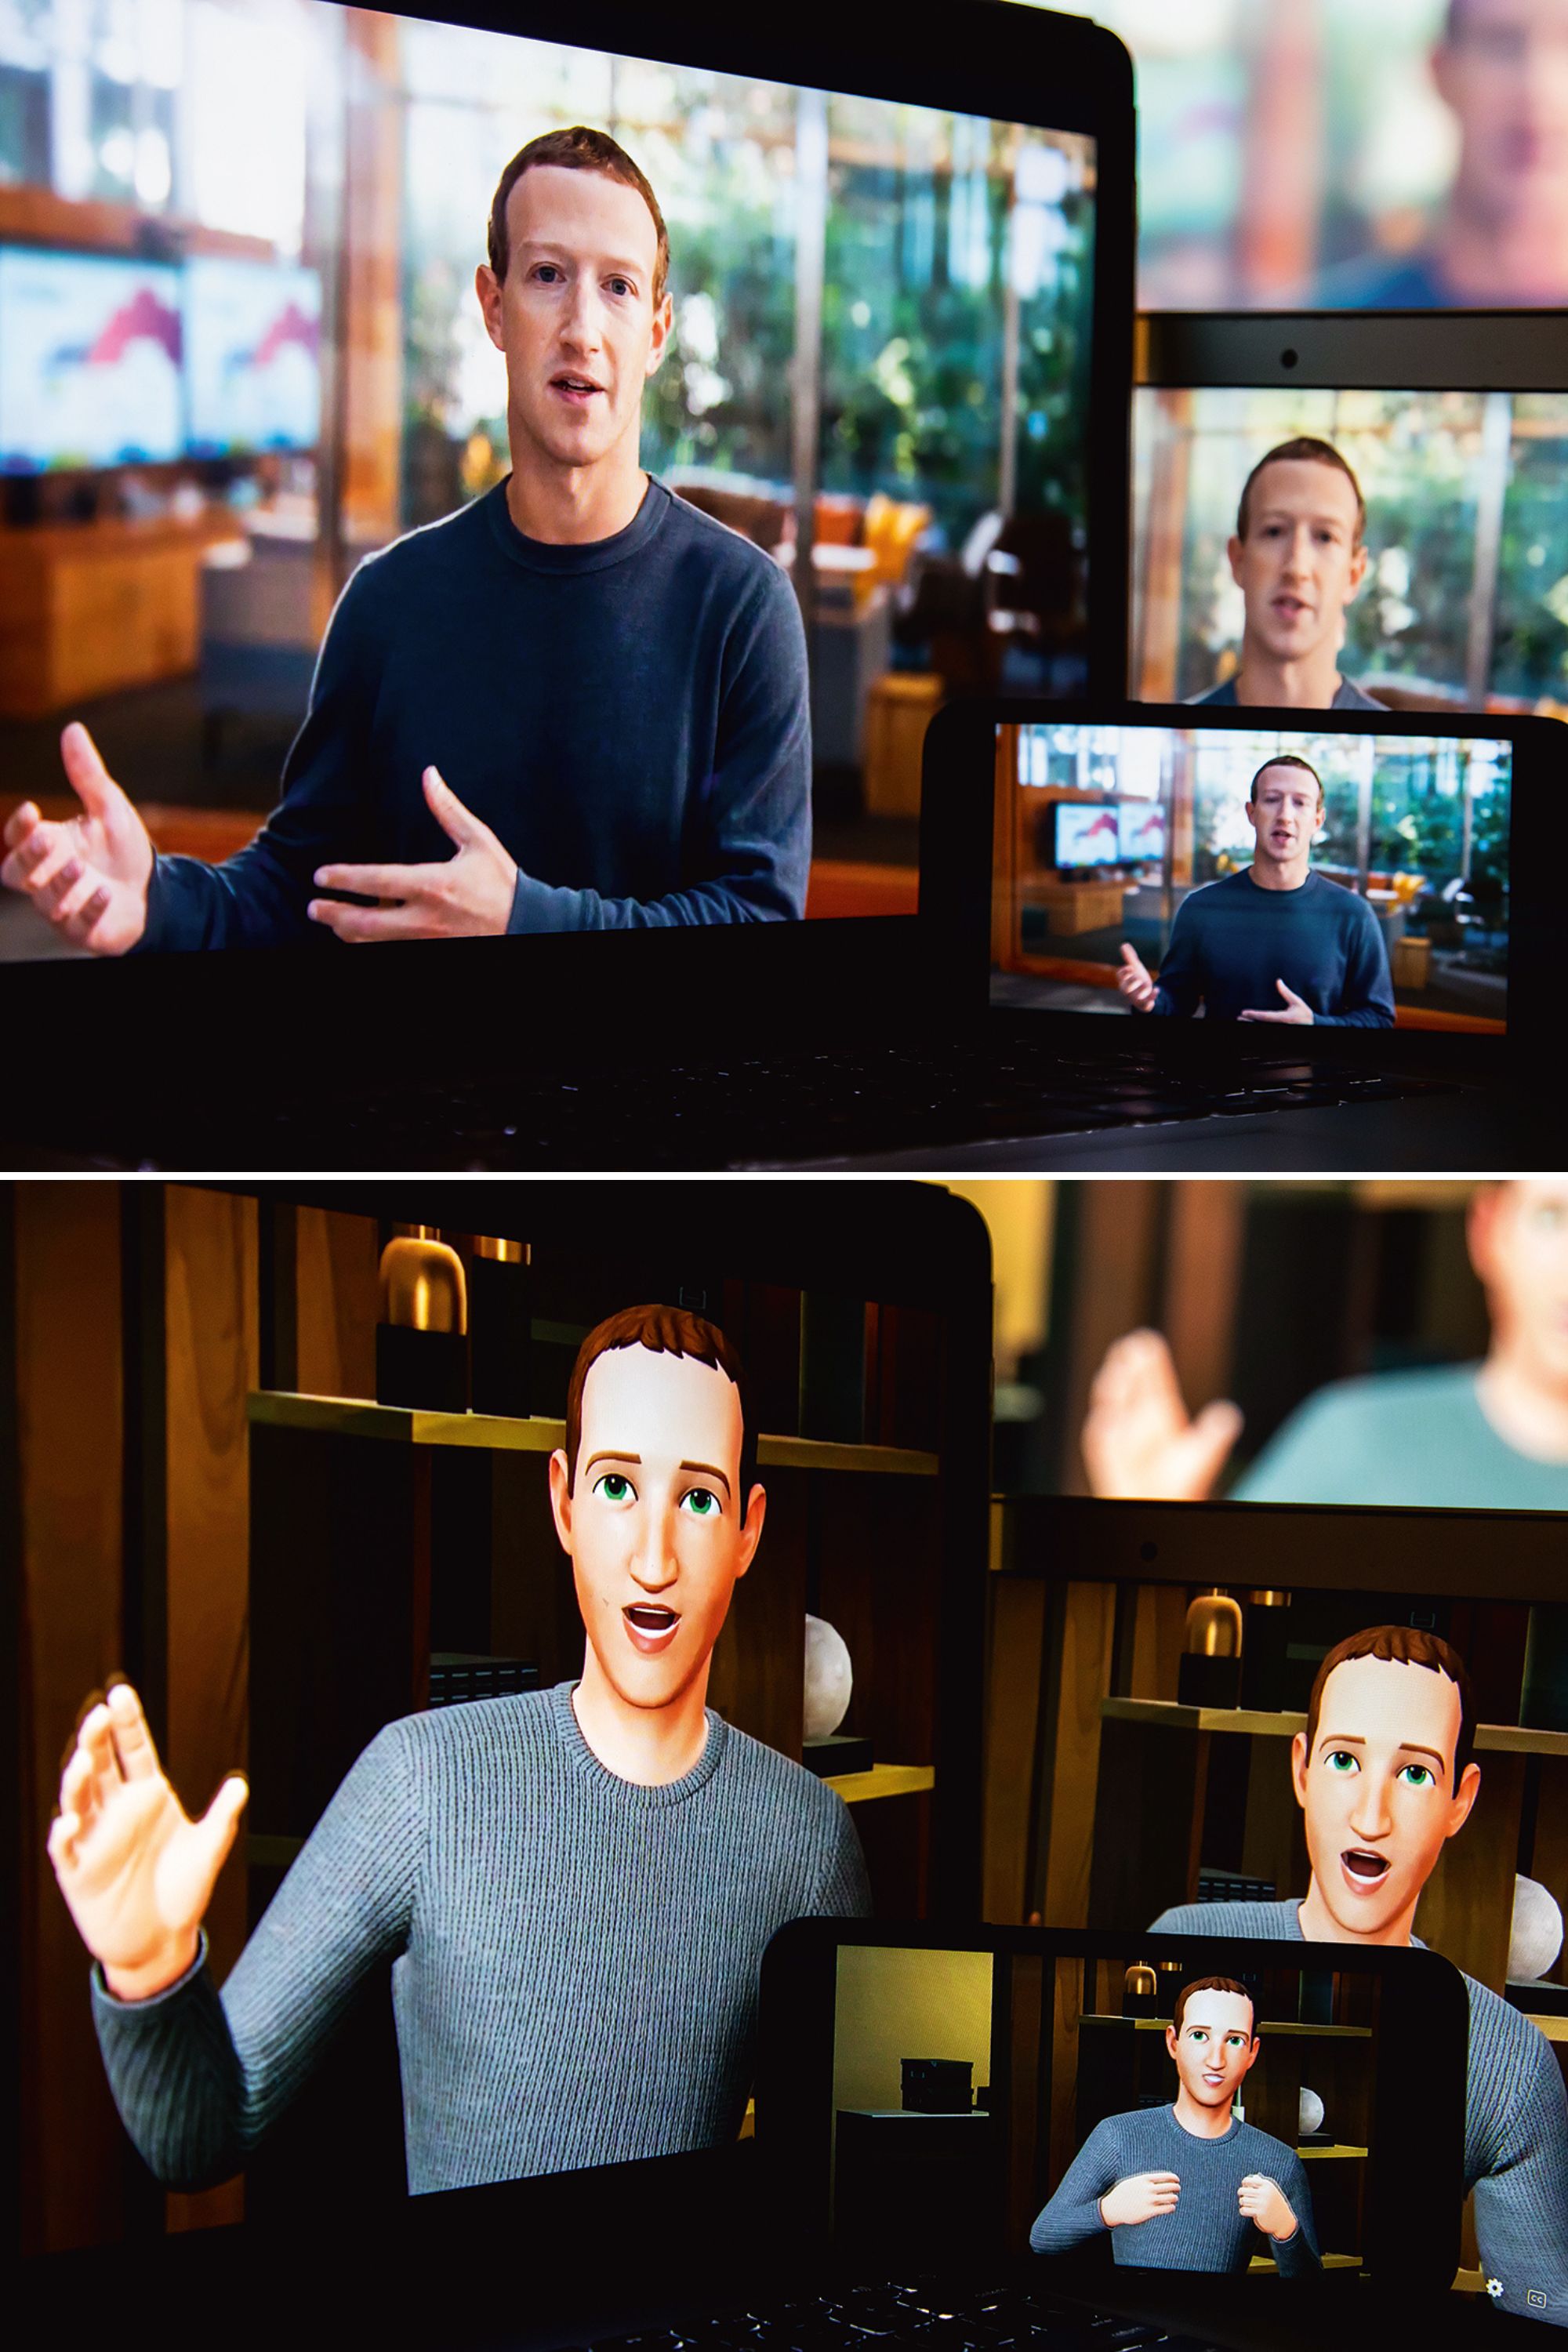 TO SEE?  - Zuckerberg in real and digital version.  he does not give up.